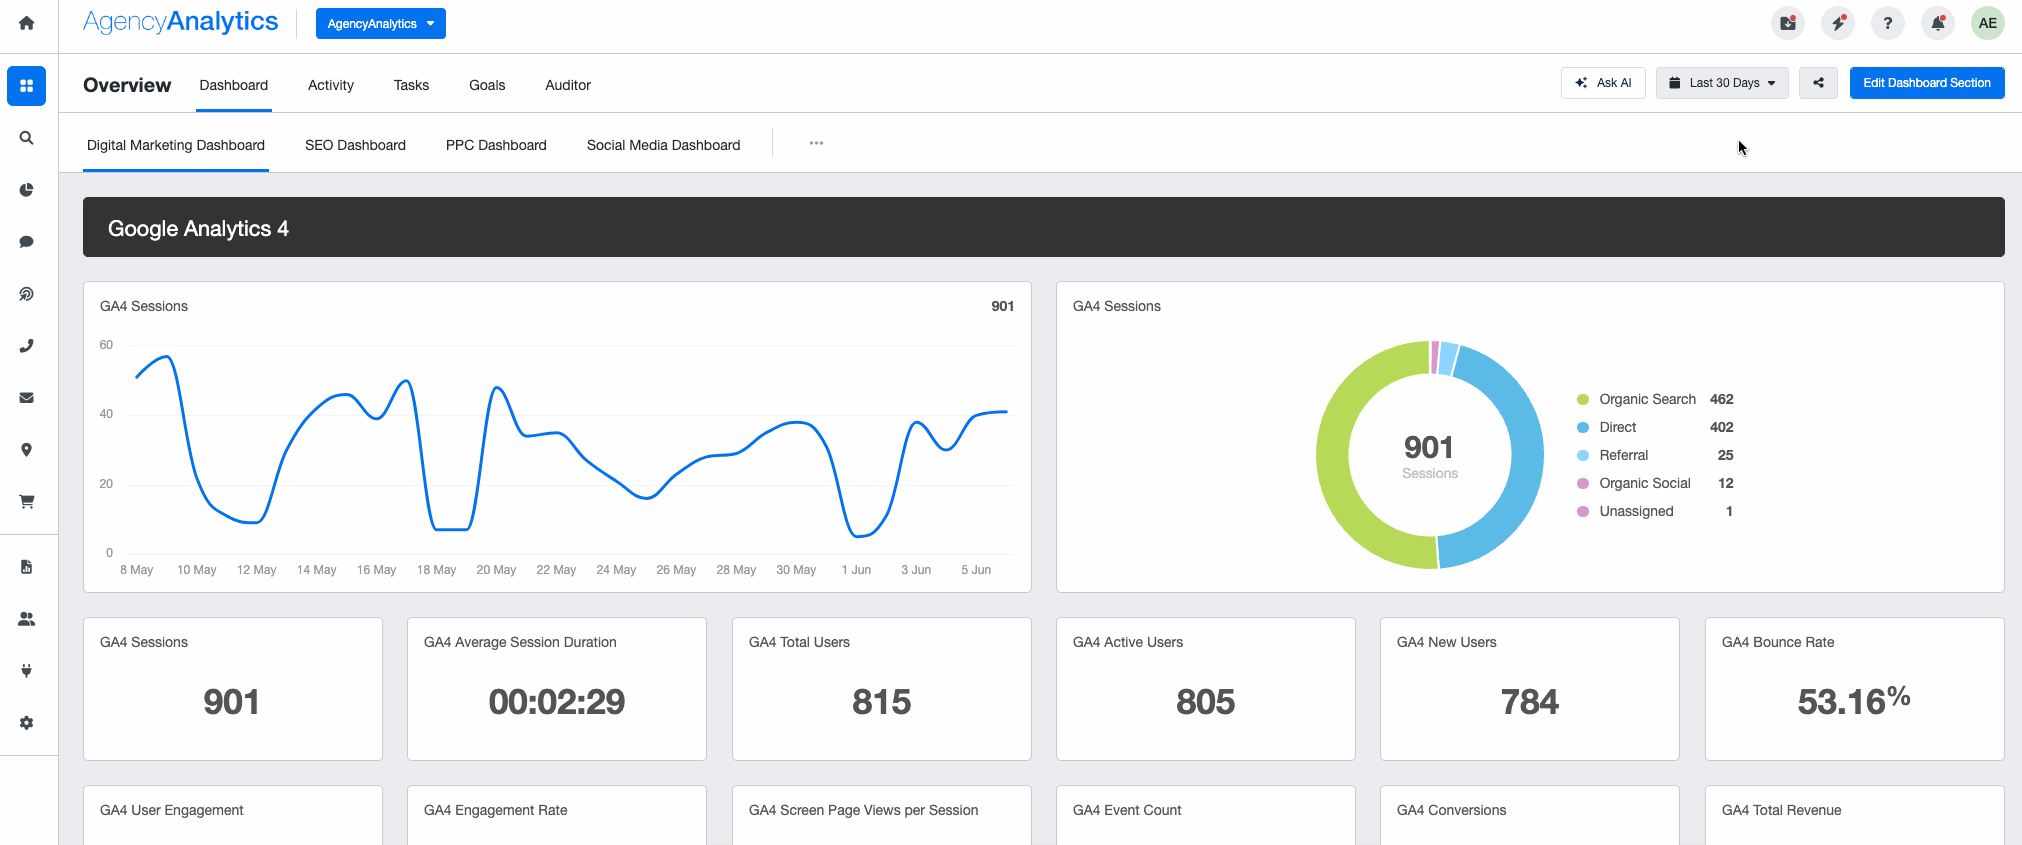 Share-All-Dashboards